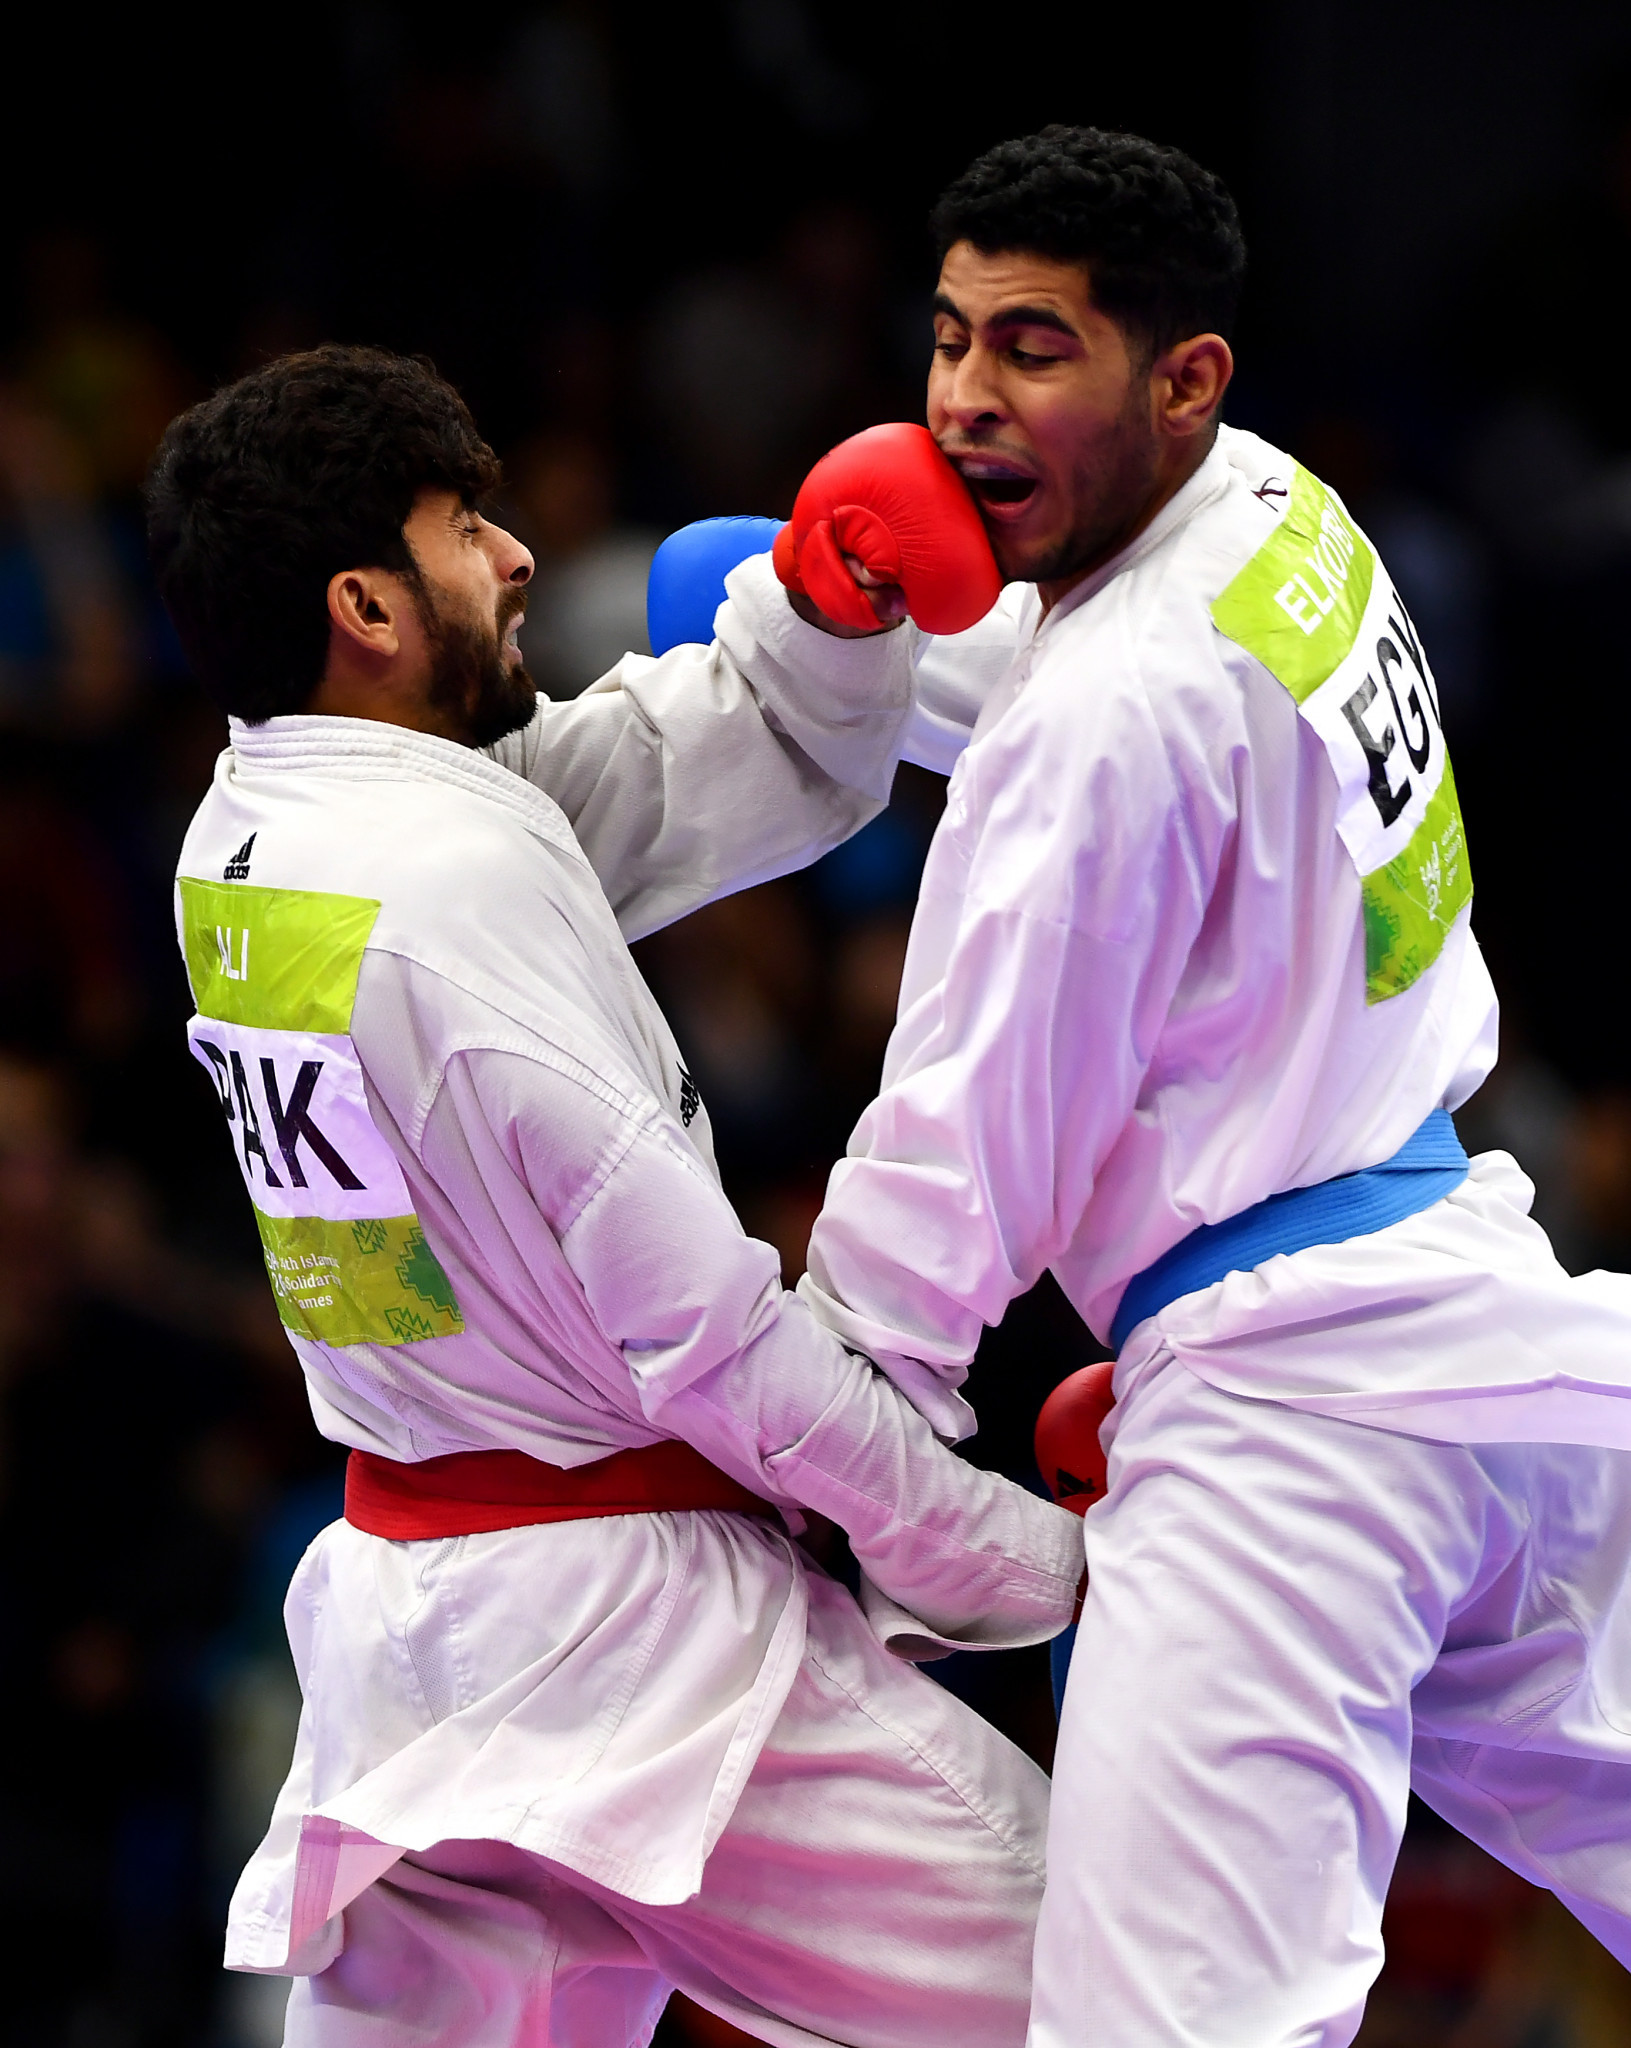  Karate is preparing for its Olympic debut in Japan, at Tokyo 2020 ©Getty Images